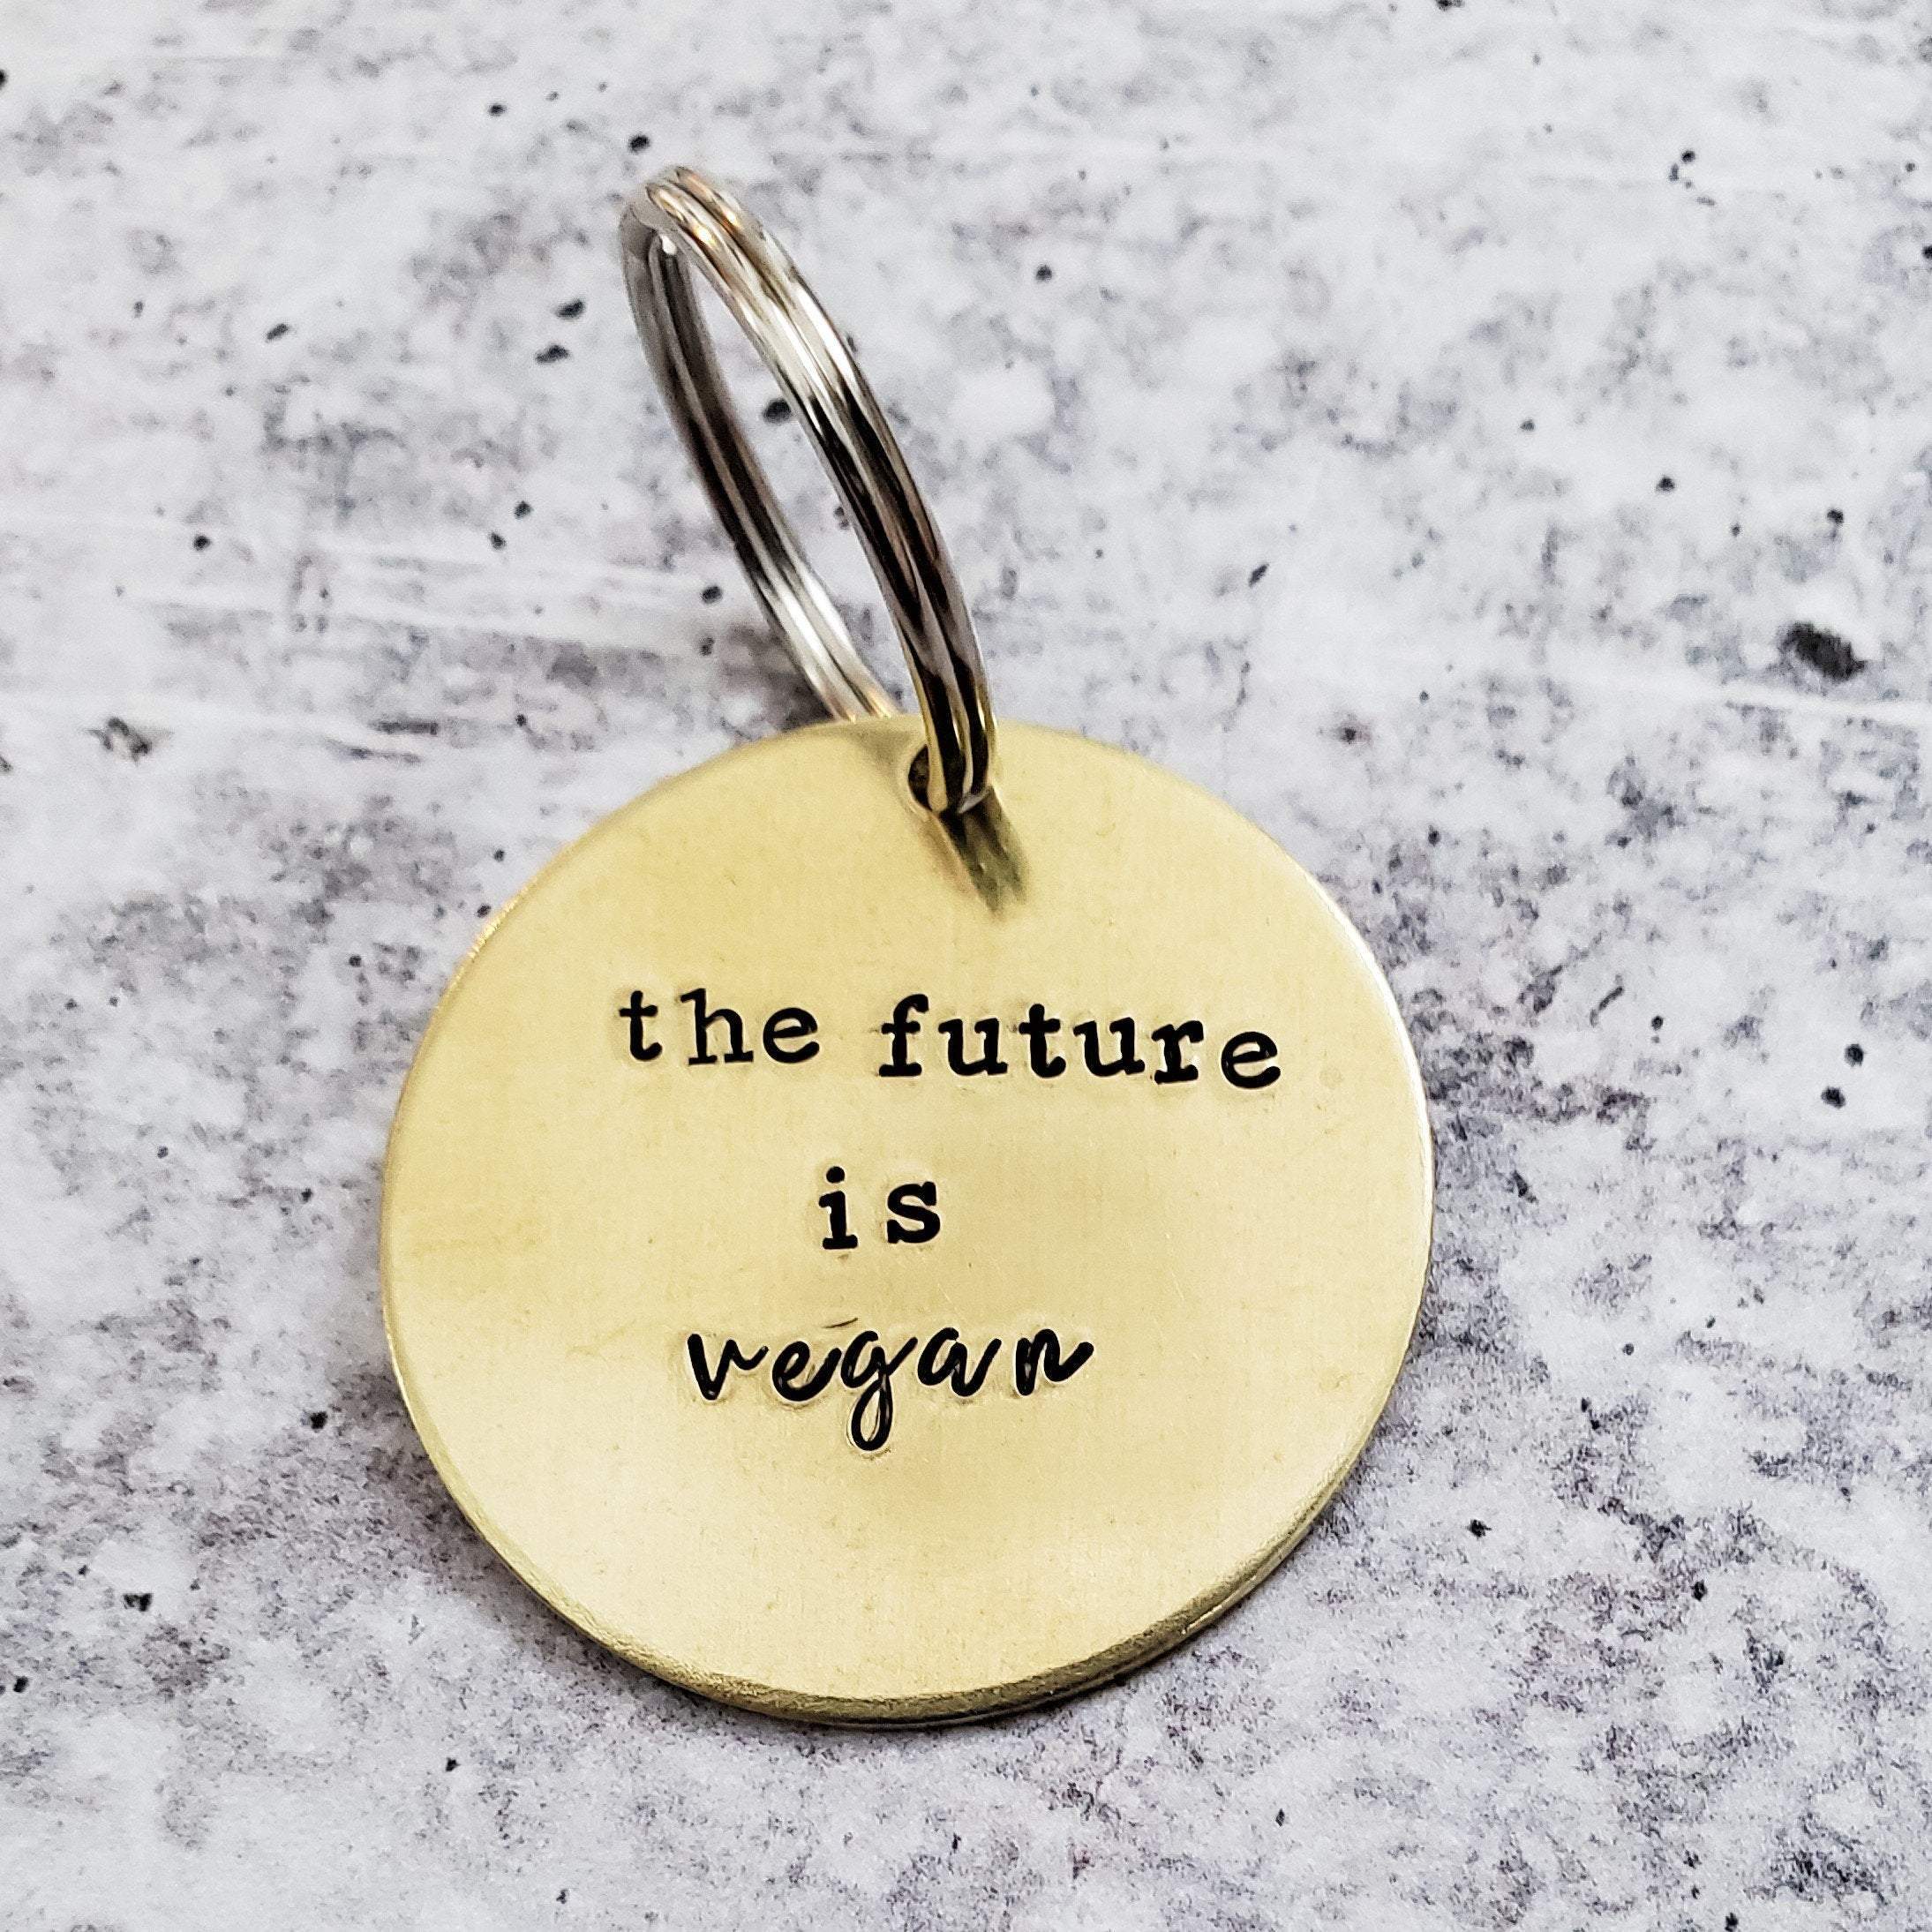 THE FUTURE IS VEGAN Brass Disc Keychain Salt and Sparkle